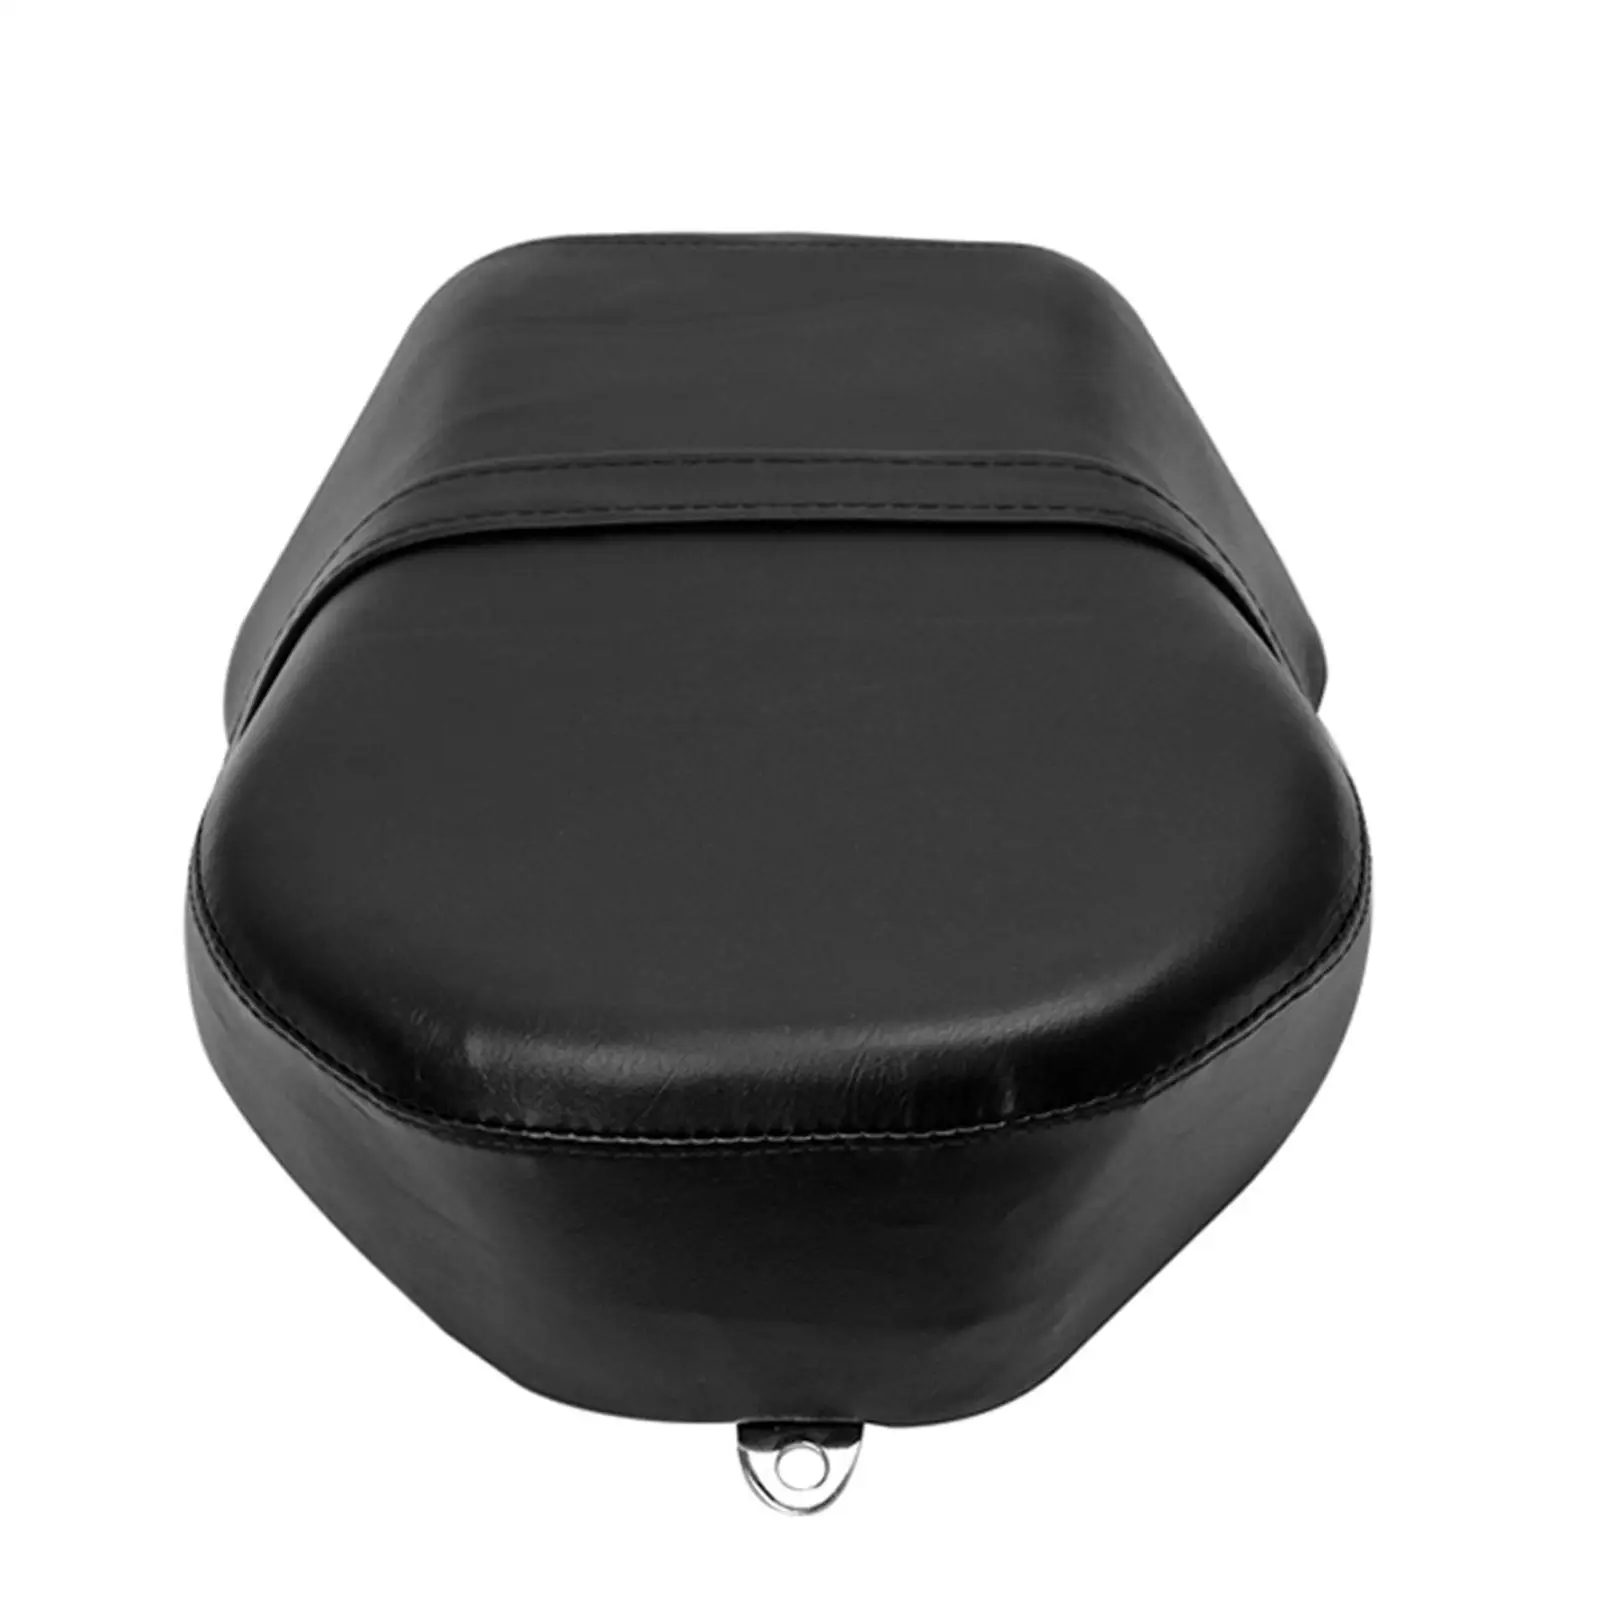 Motorcycle Rear Passenger Seat Cushion for Harley Sportster Spare Parts